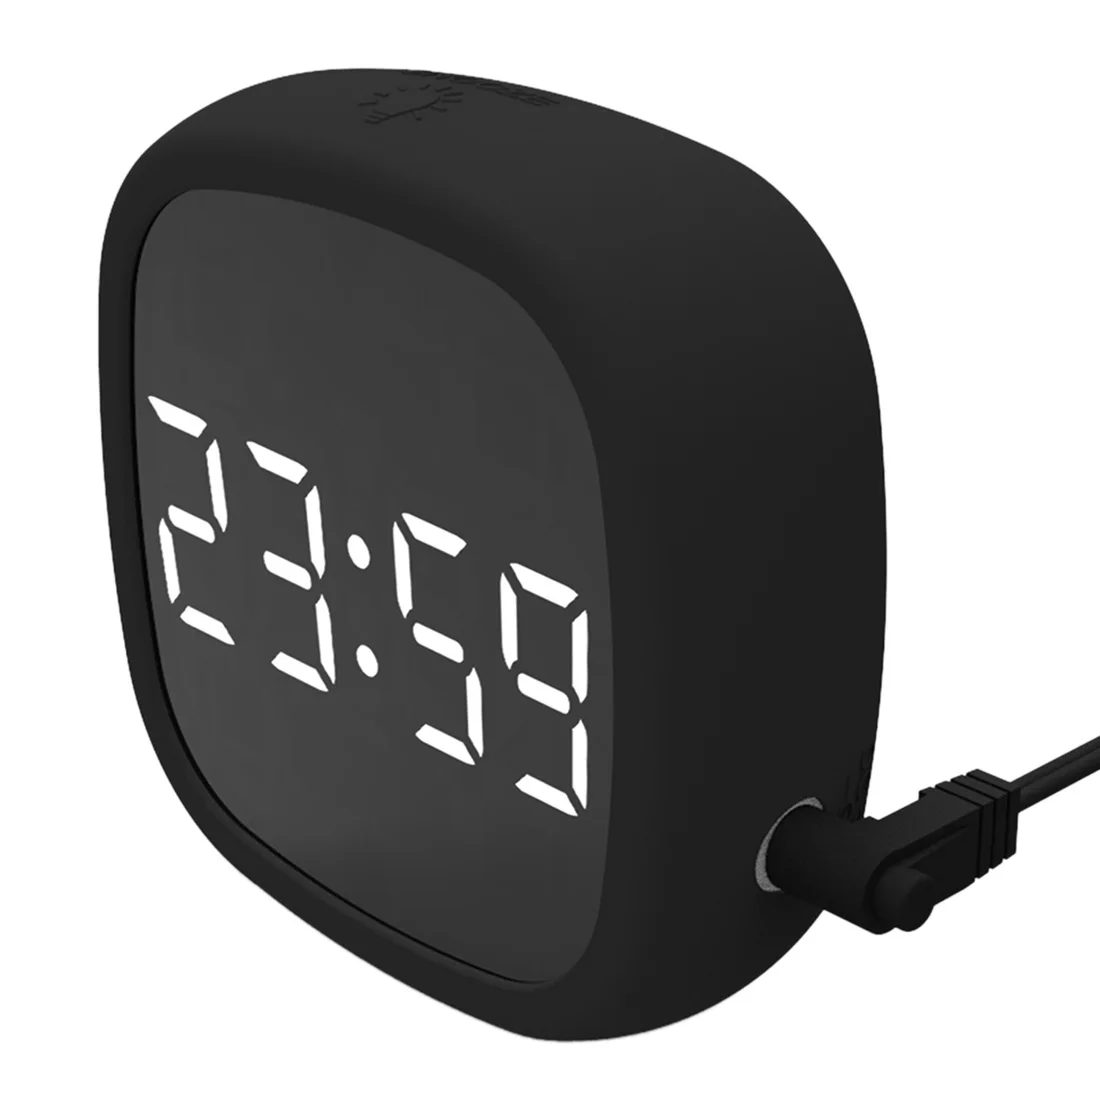 Фото LED Digital Display Alarm Clock Snooze with Dimmable and Sound Control Function for Bedroom Office Travel - Black | Дом и сад